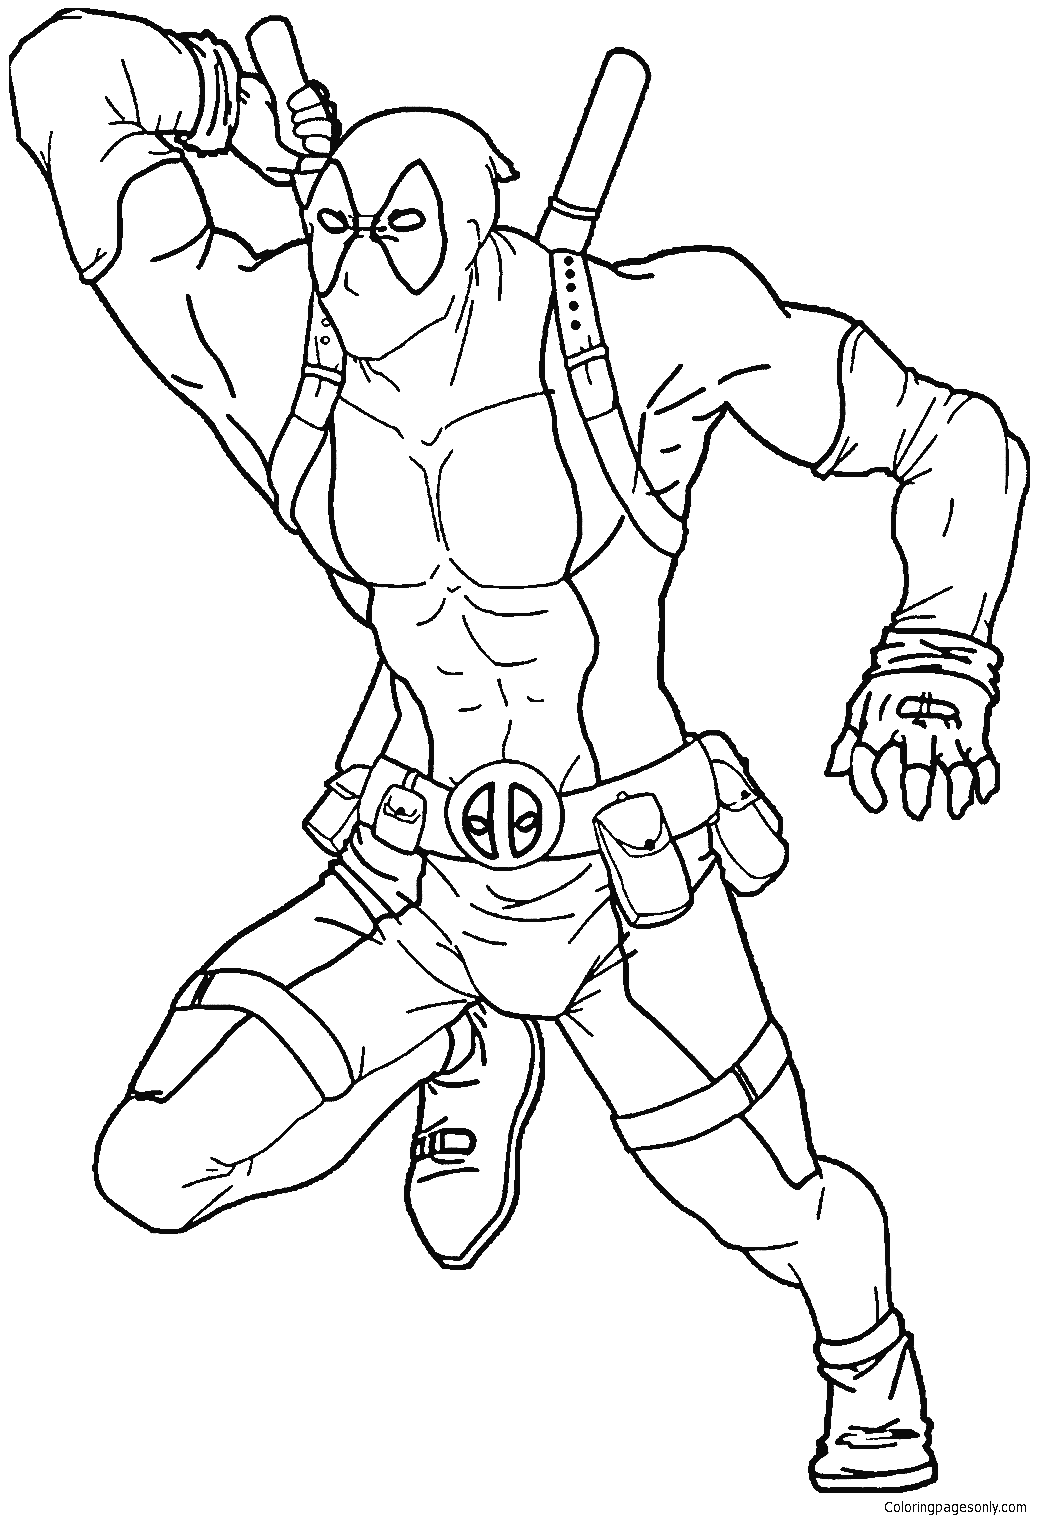 Deadpool coloring pages printable for free download